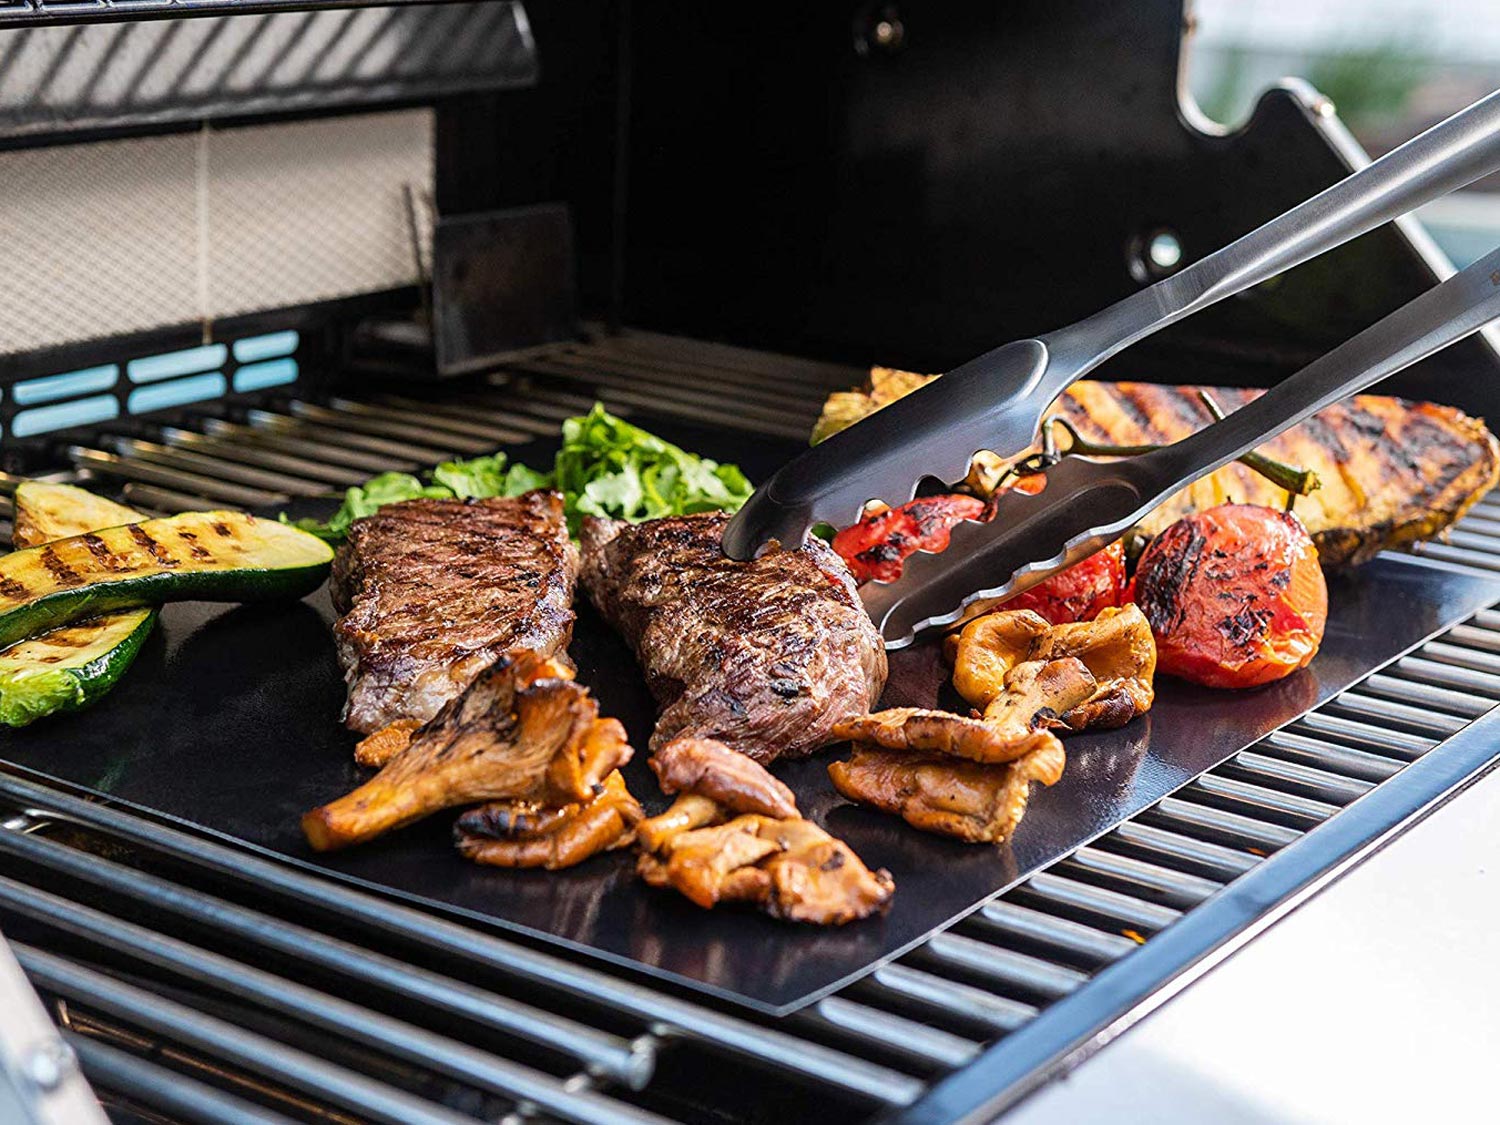 How to Use a Barbecue Grill Mat